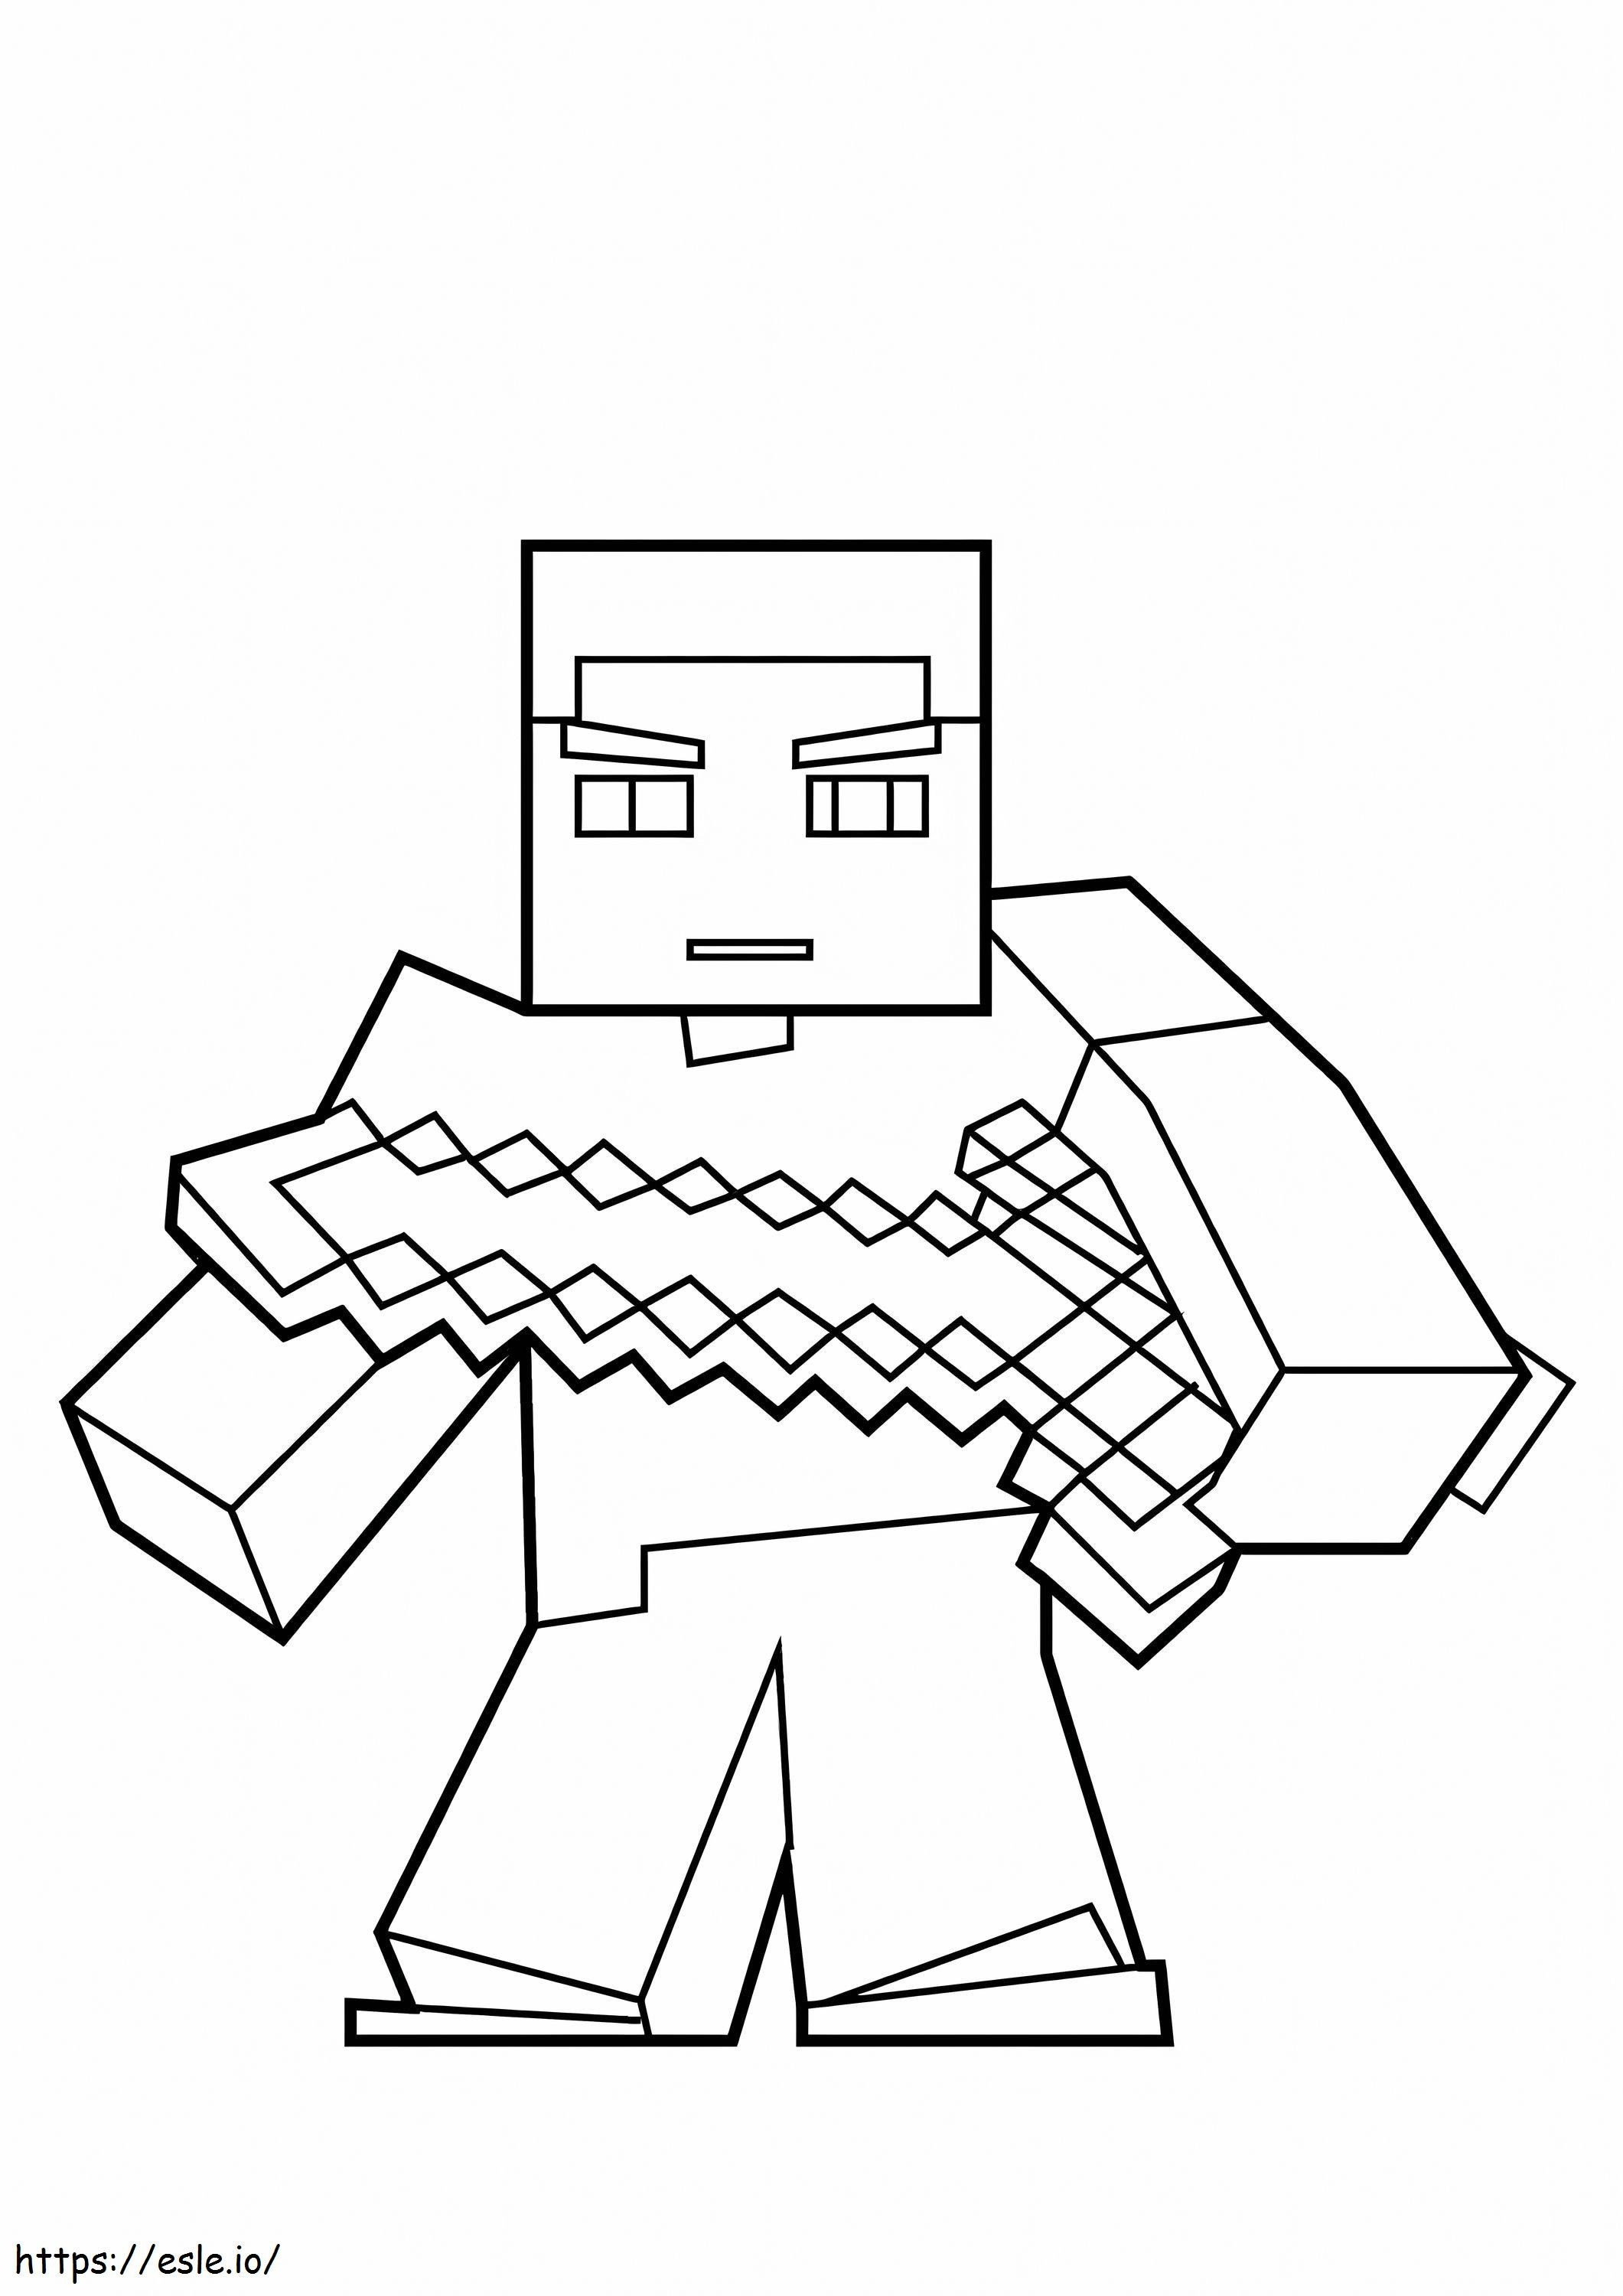 Dear Steve Holds The Sword coloring page